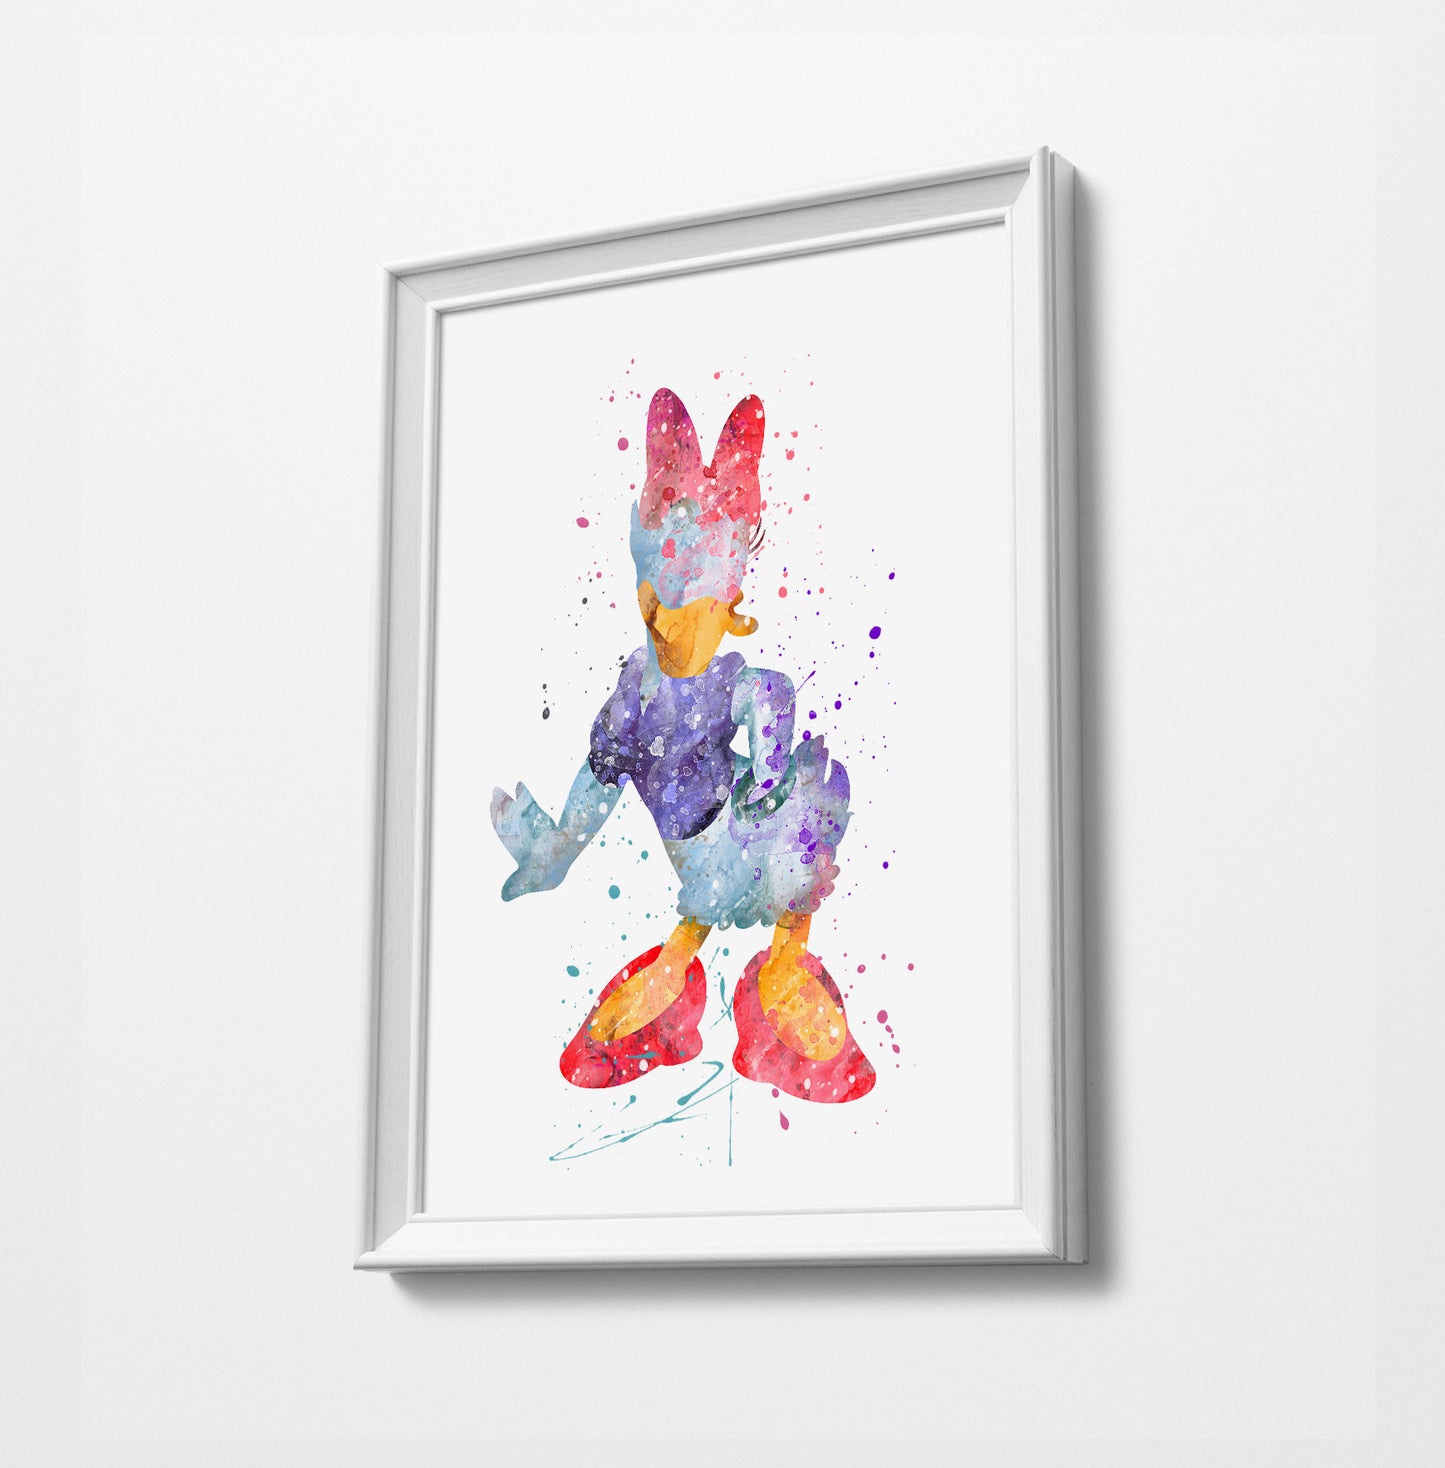 Daisy | Minimalist Watercolor Art Print Poster Gift Idea For Him Or Her |